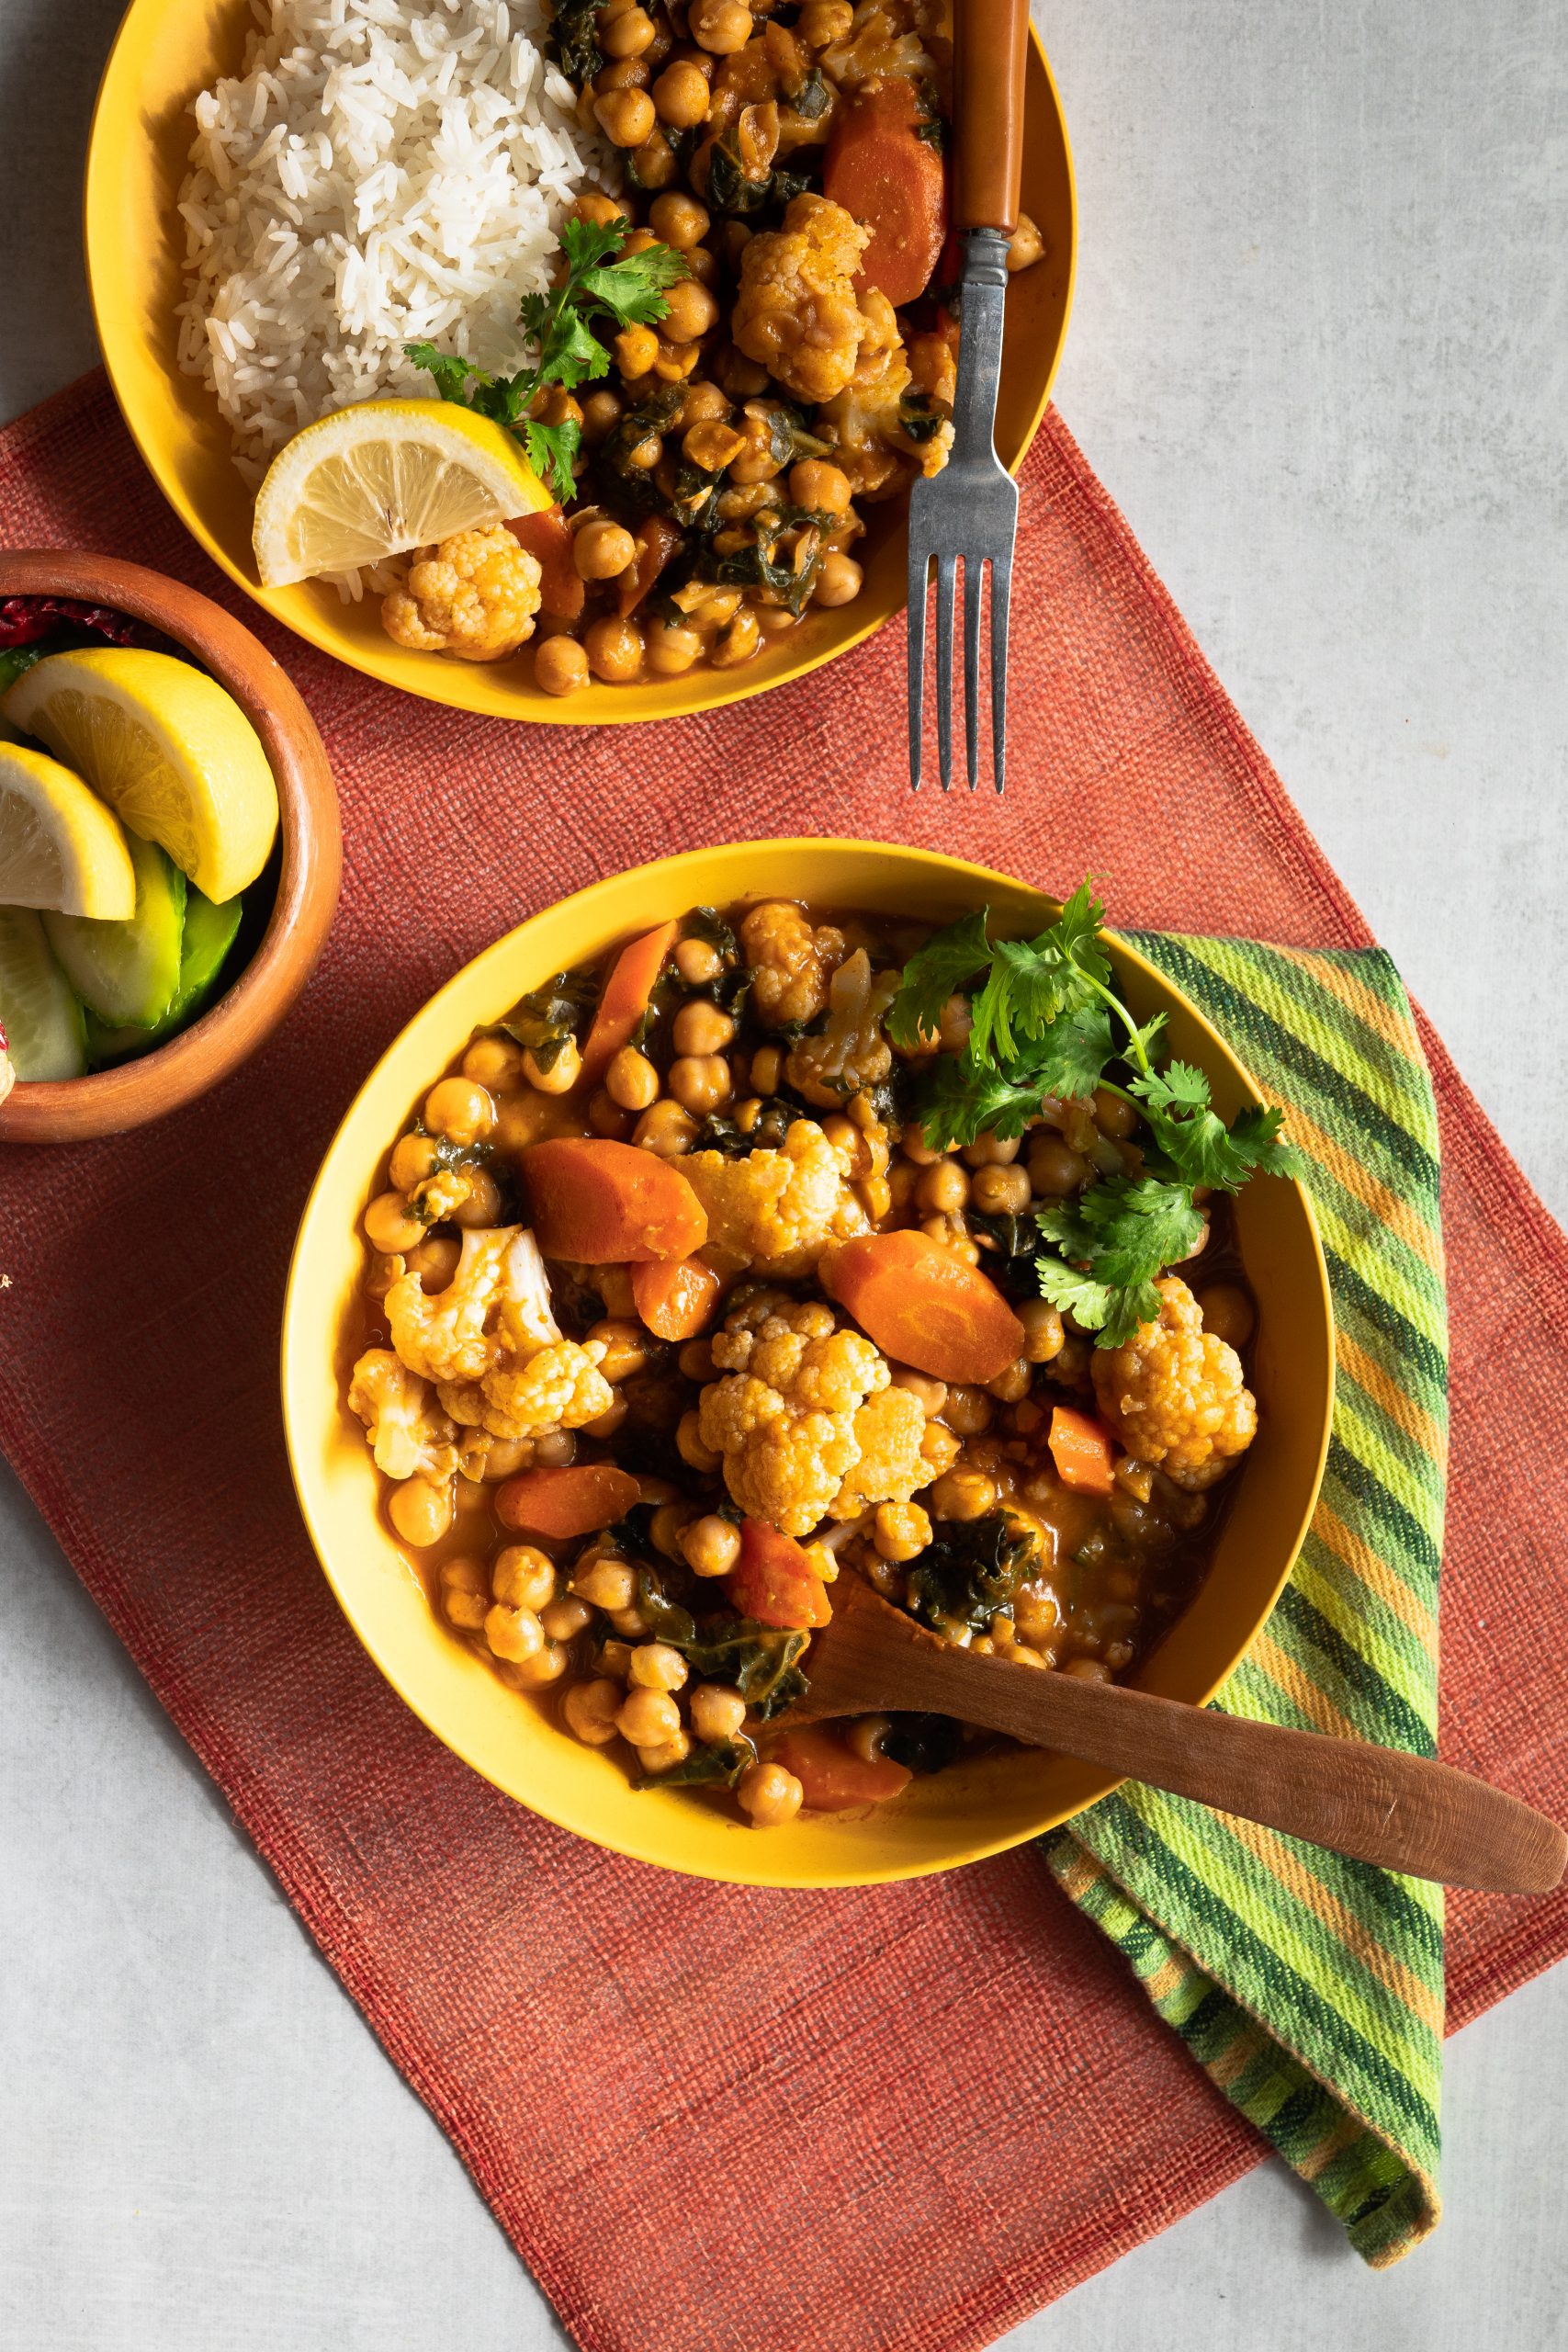 https://goodly.ca/wp-content/uploads/2021/02/Classy-Carrot-Morrocan-Inspired-Cauliflower-Chickpea-Stew-2-scaled.jpg